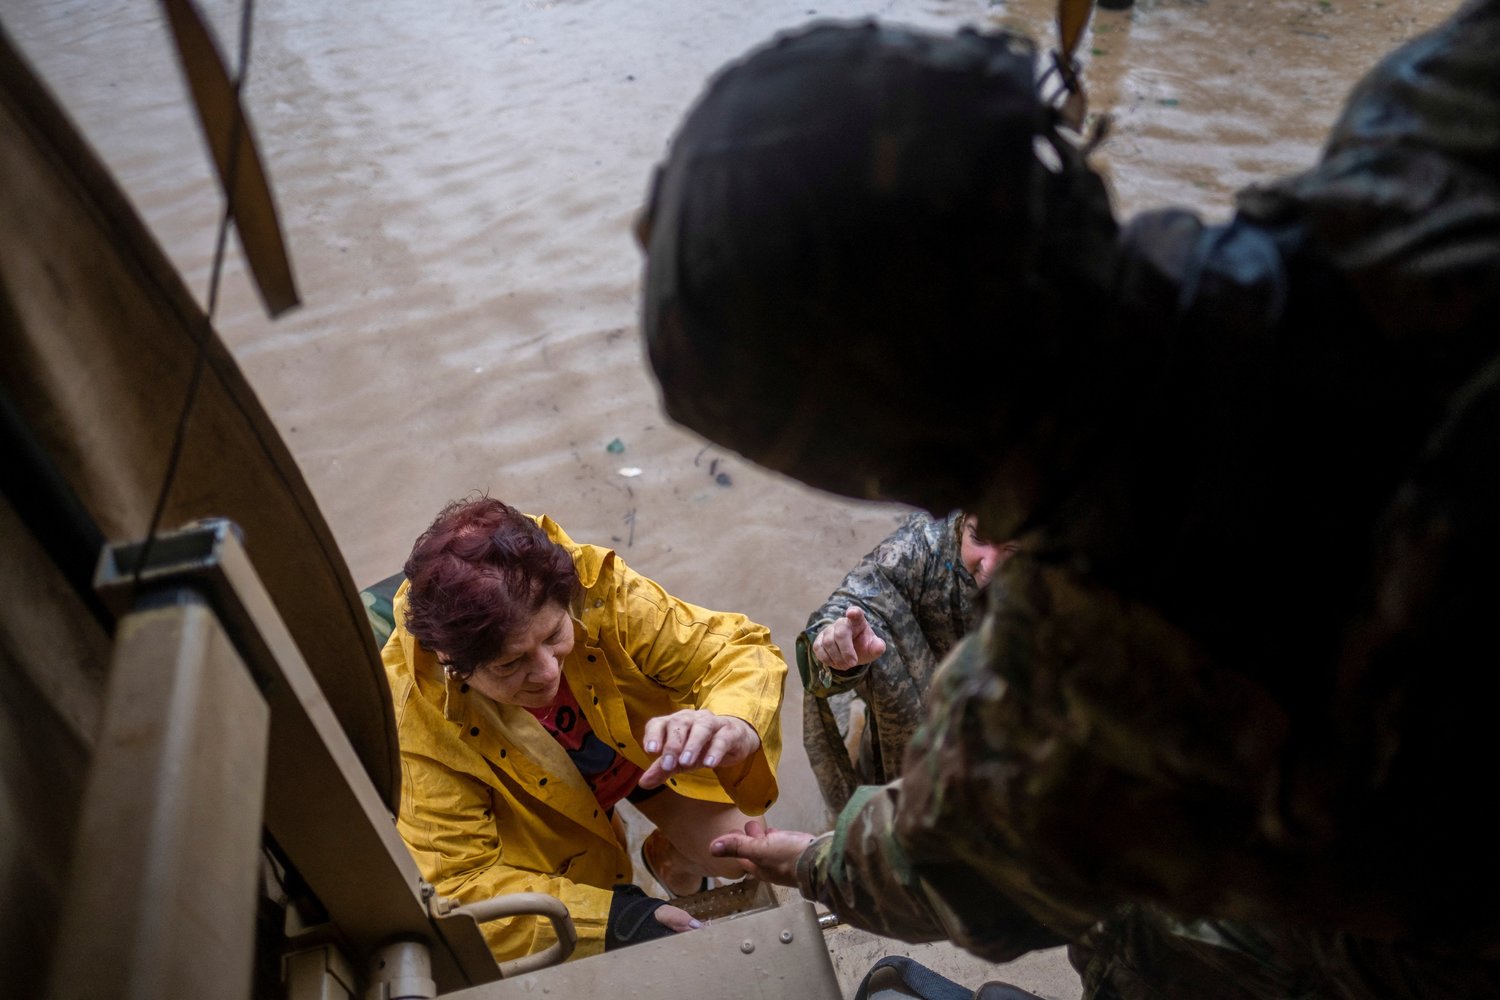 Members of the Puerto Rico National Guard rescue a woman stranded in her house Sept. 19 in the aftermath of Hurricane Fiona in Salinas, Puerto Rico.